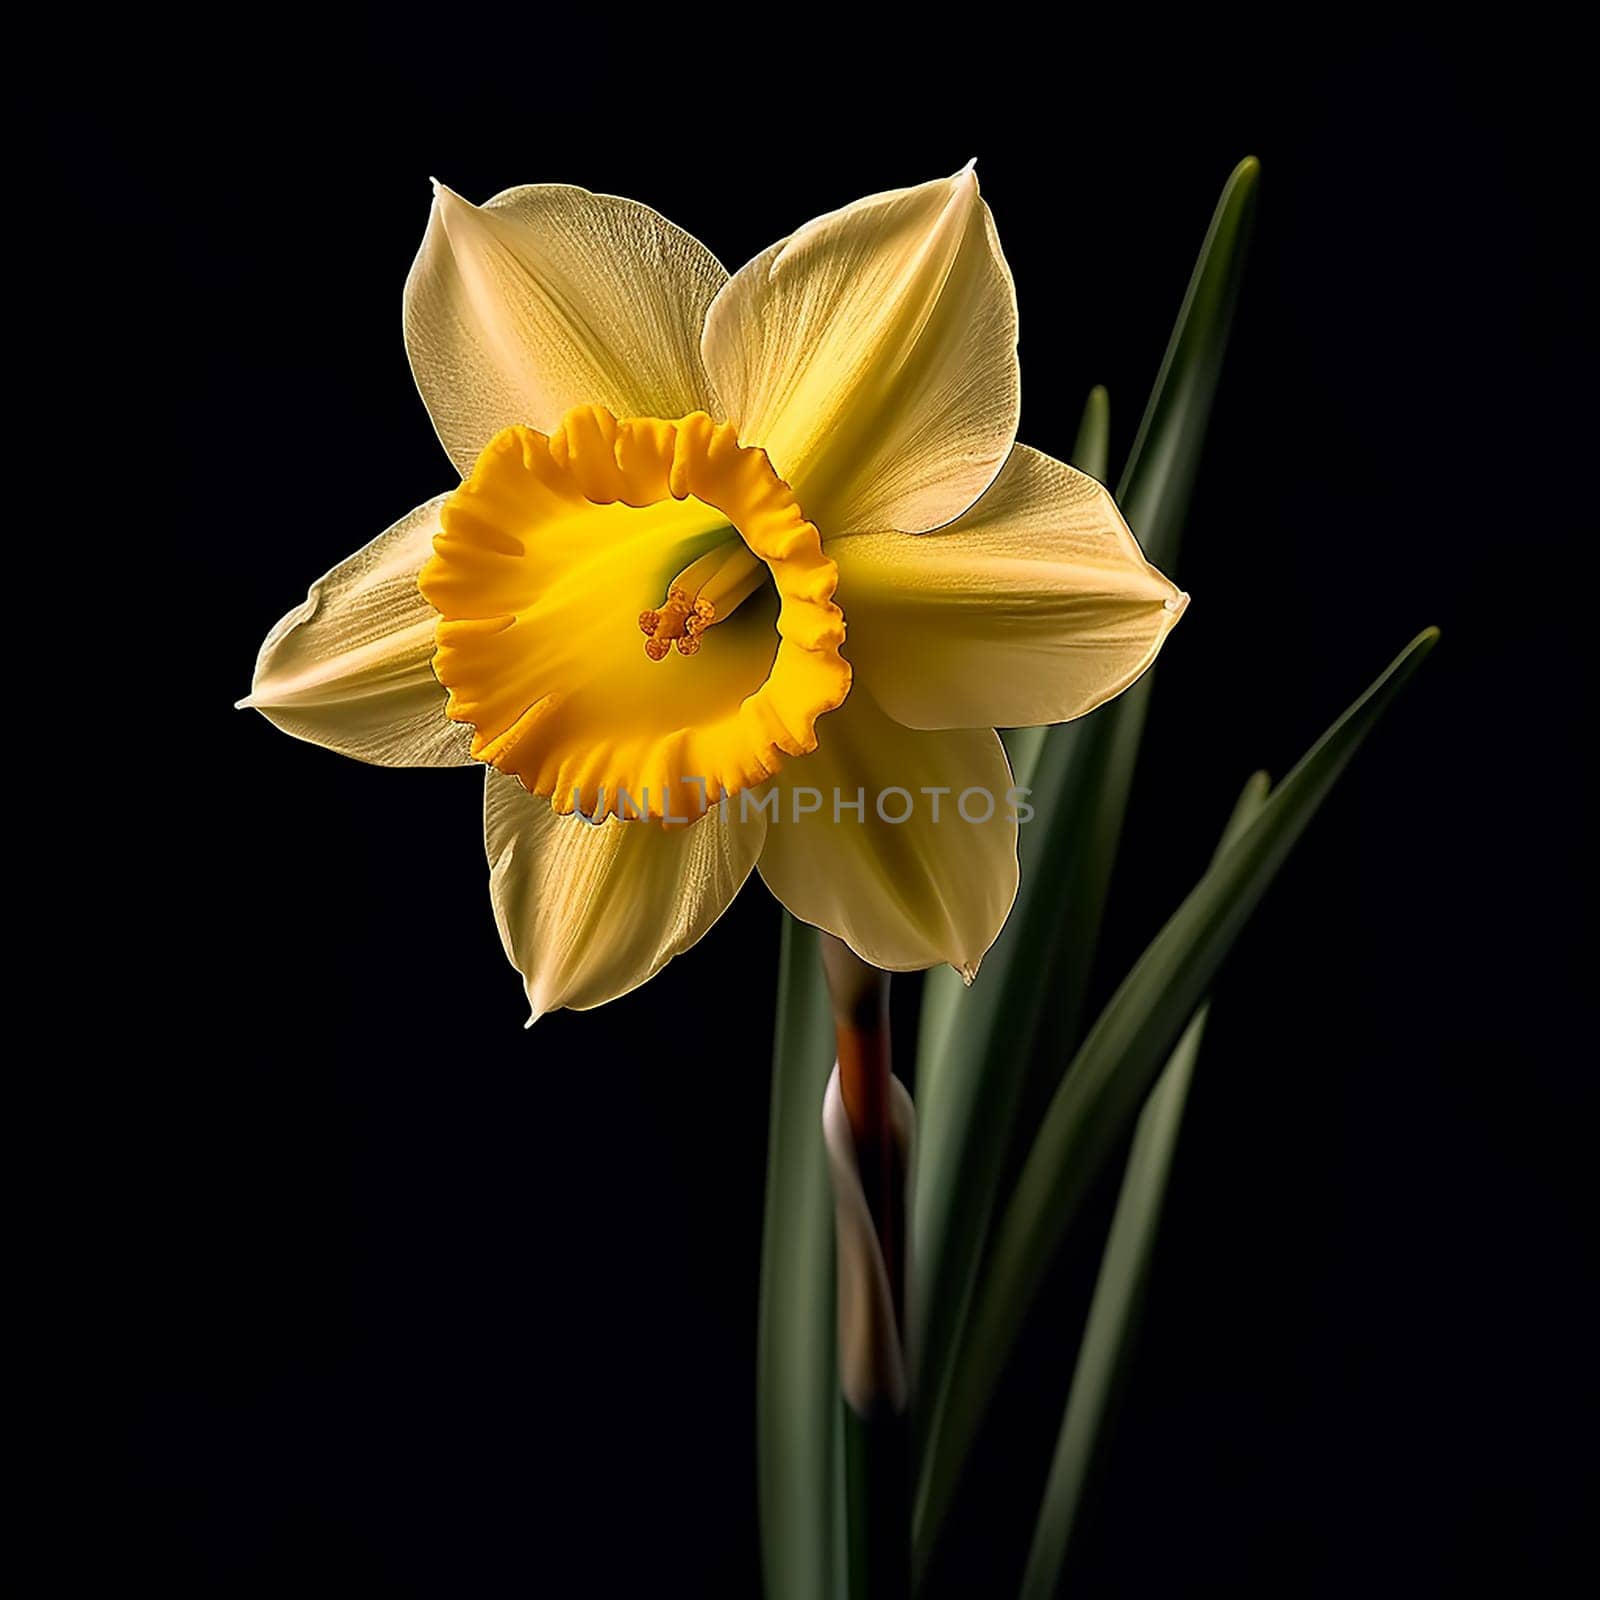 A single vibrant yellow daffodil against a black background.